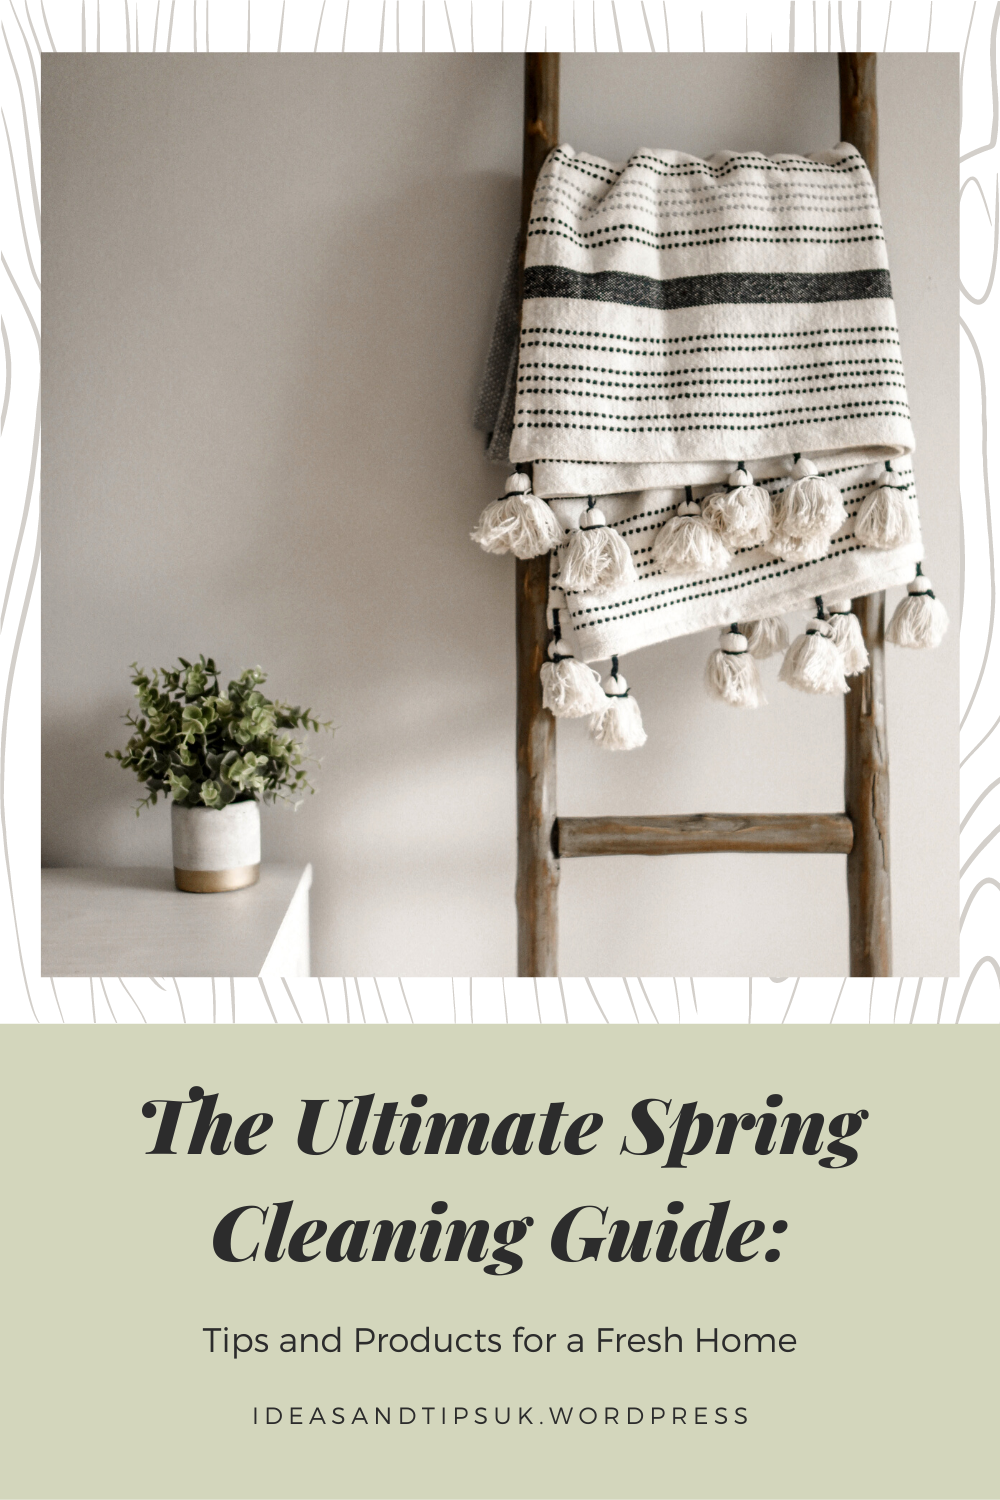 “The Ultimate Spring Cleaning Guide: Tips and Products for a Fresh Home”